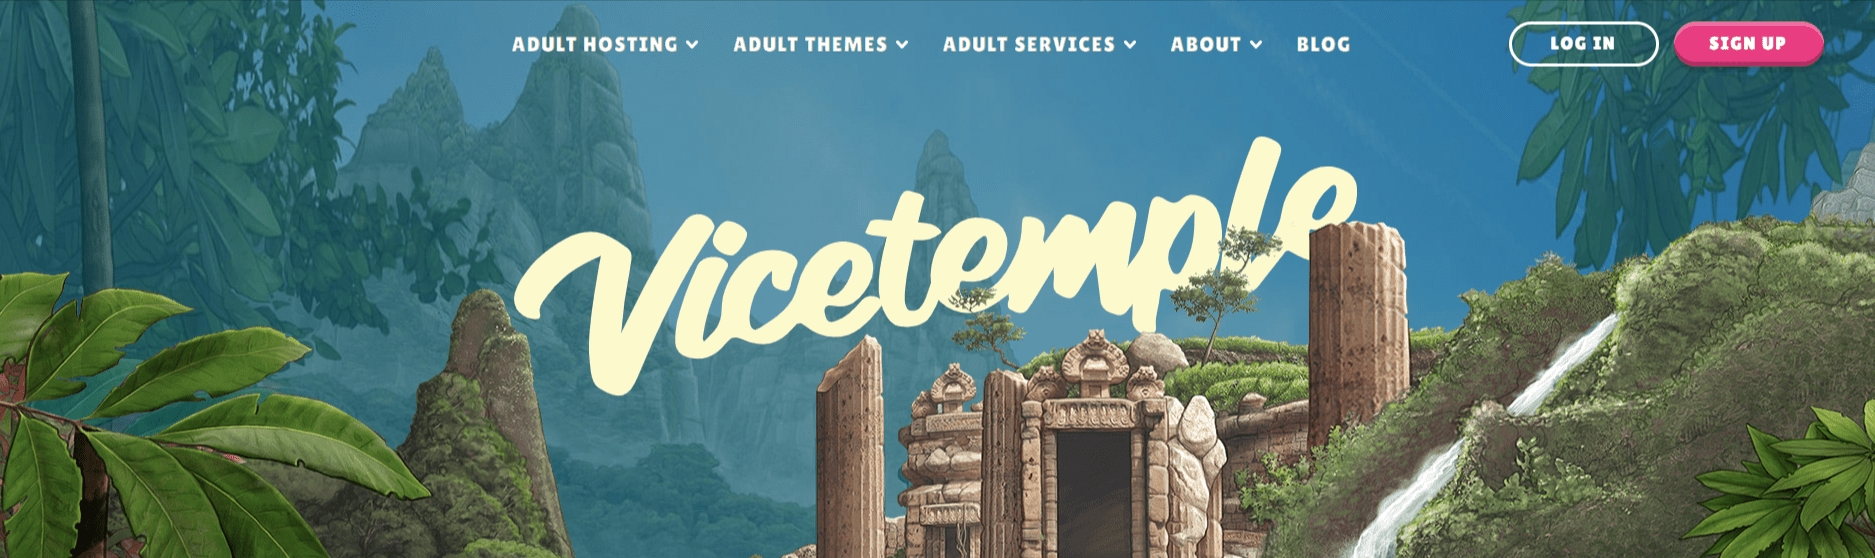 Vicetemple-Hosting-Review